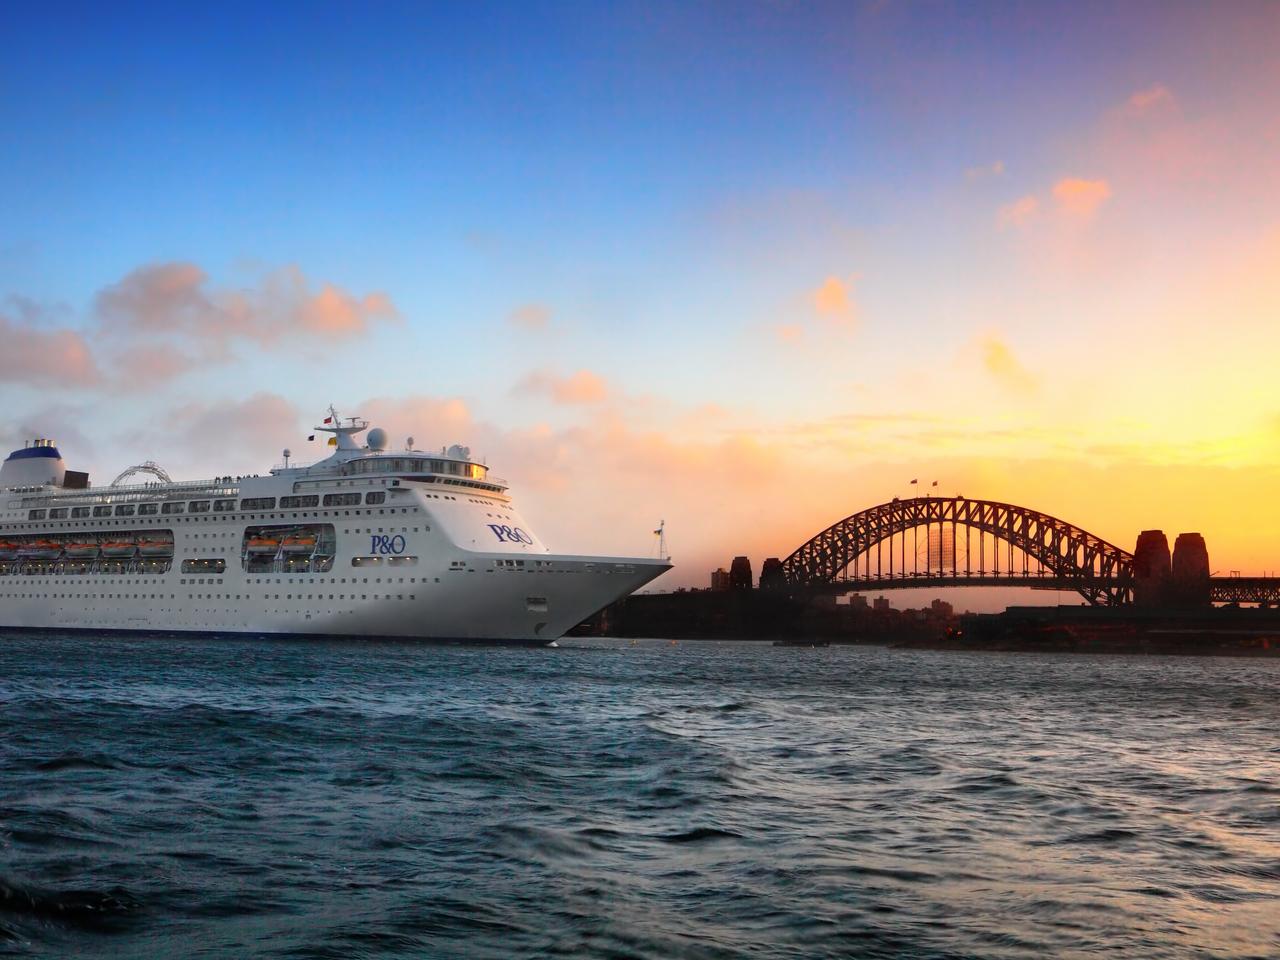 Sydney, Australia - December 29, 2013; P & O cruise ship navigates choppy harbour waters at sunrise by a silhouetted view of Sydney Harbour Bridge